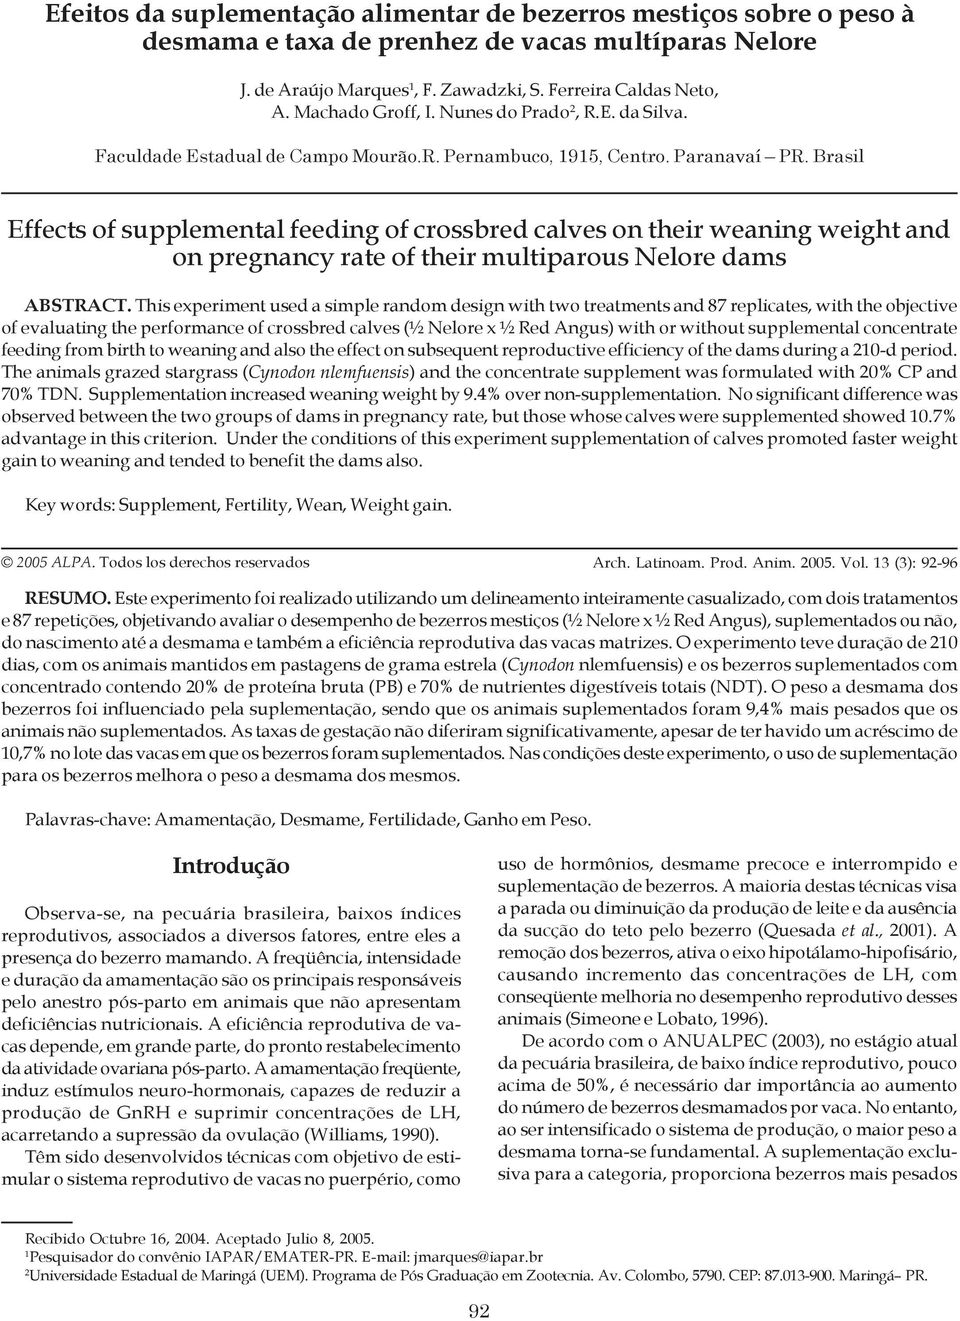 Brasil Effects of supplemental feeding of crossbred calves on their weaning weight and on pregnancy rate of their multiparous Nelore dams ABSTRACT.